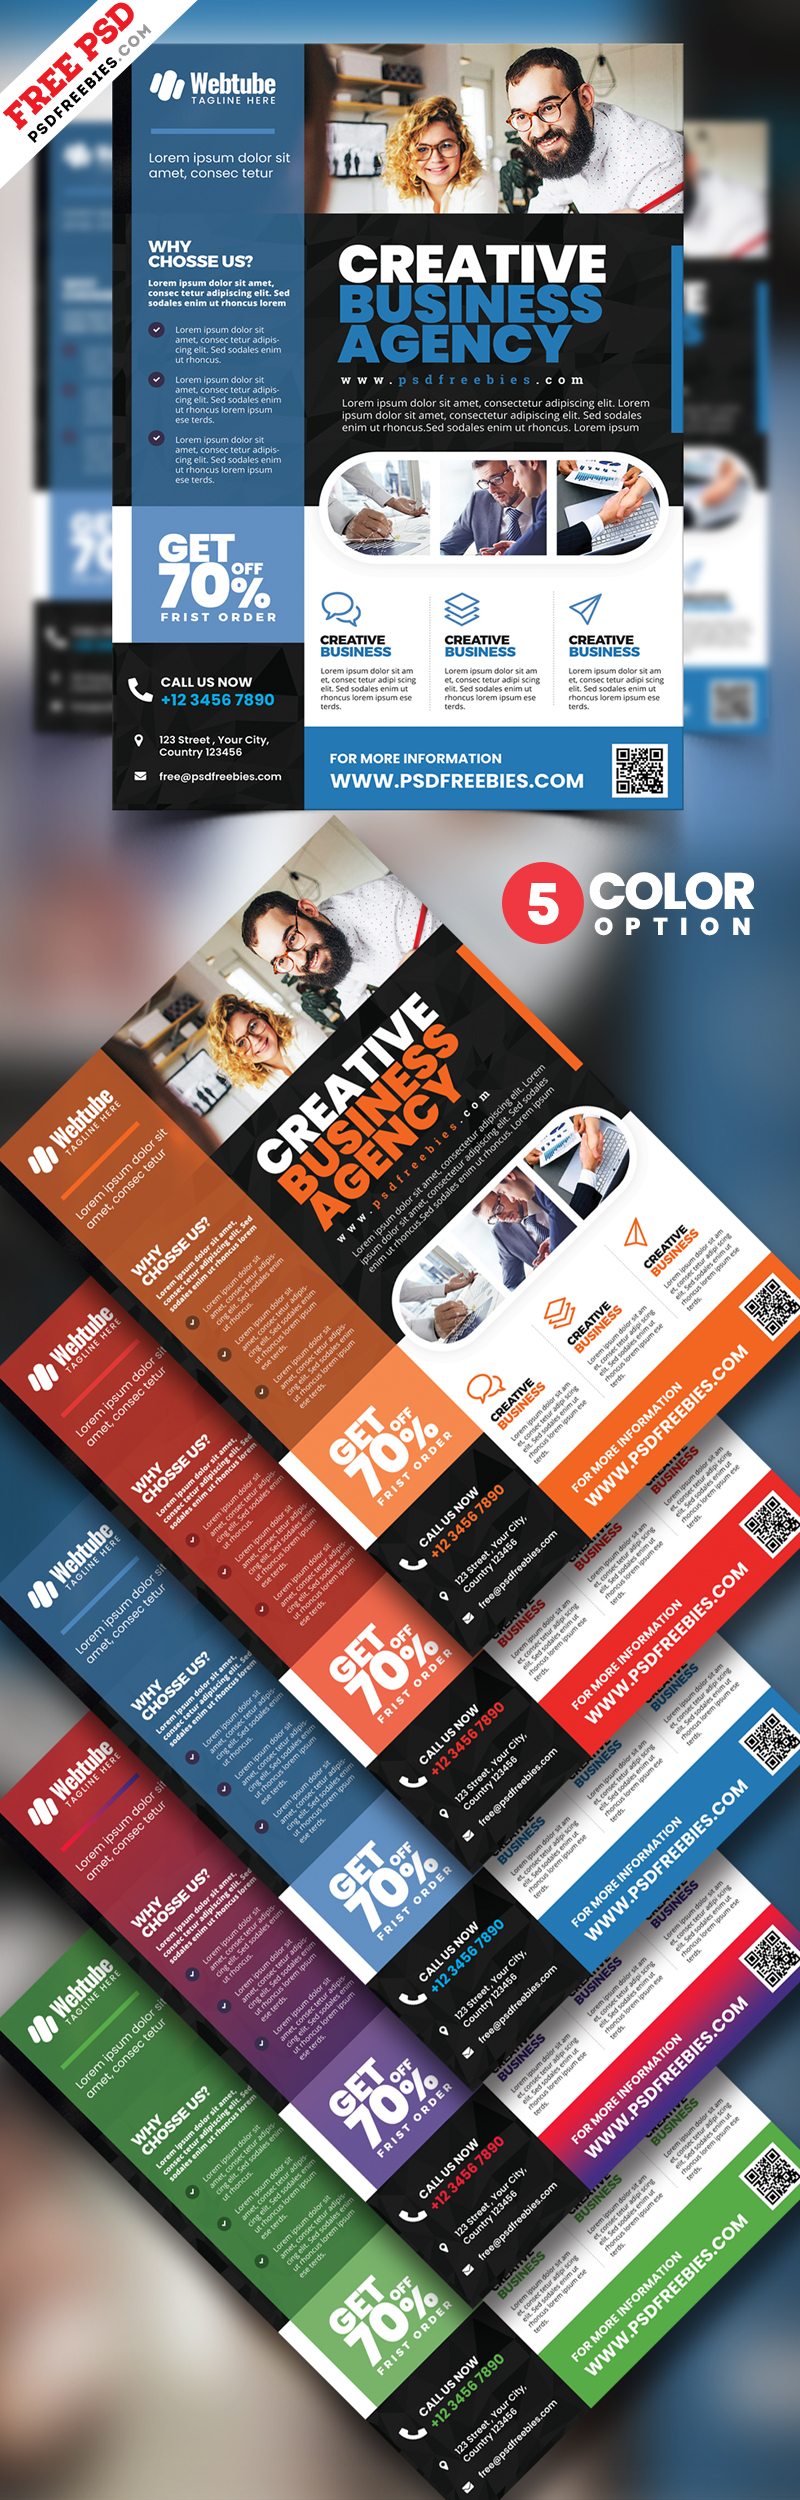 Multipurpose-Business-Flyer-PSD-Free-Download2